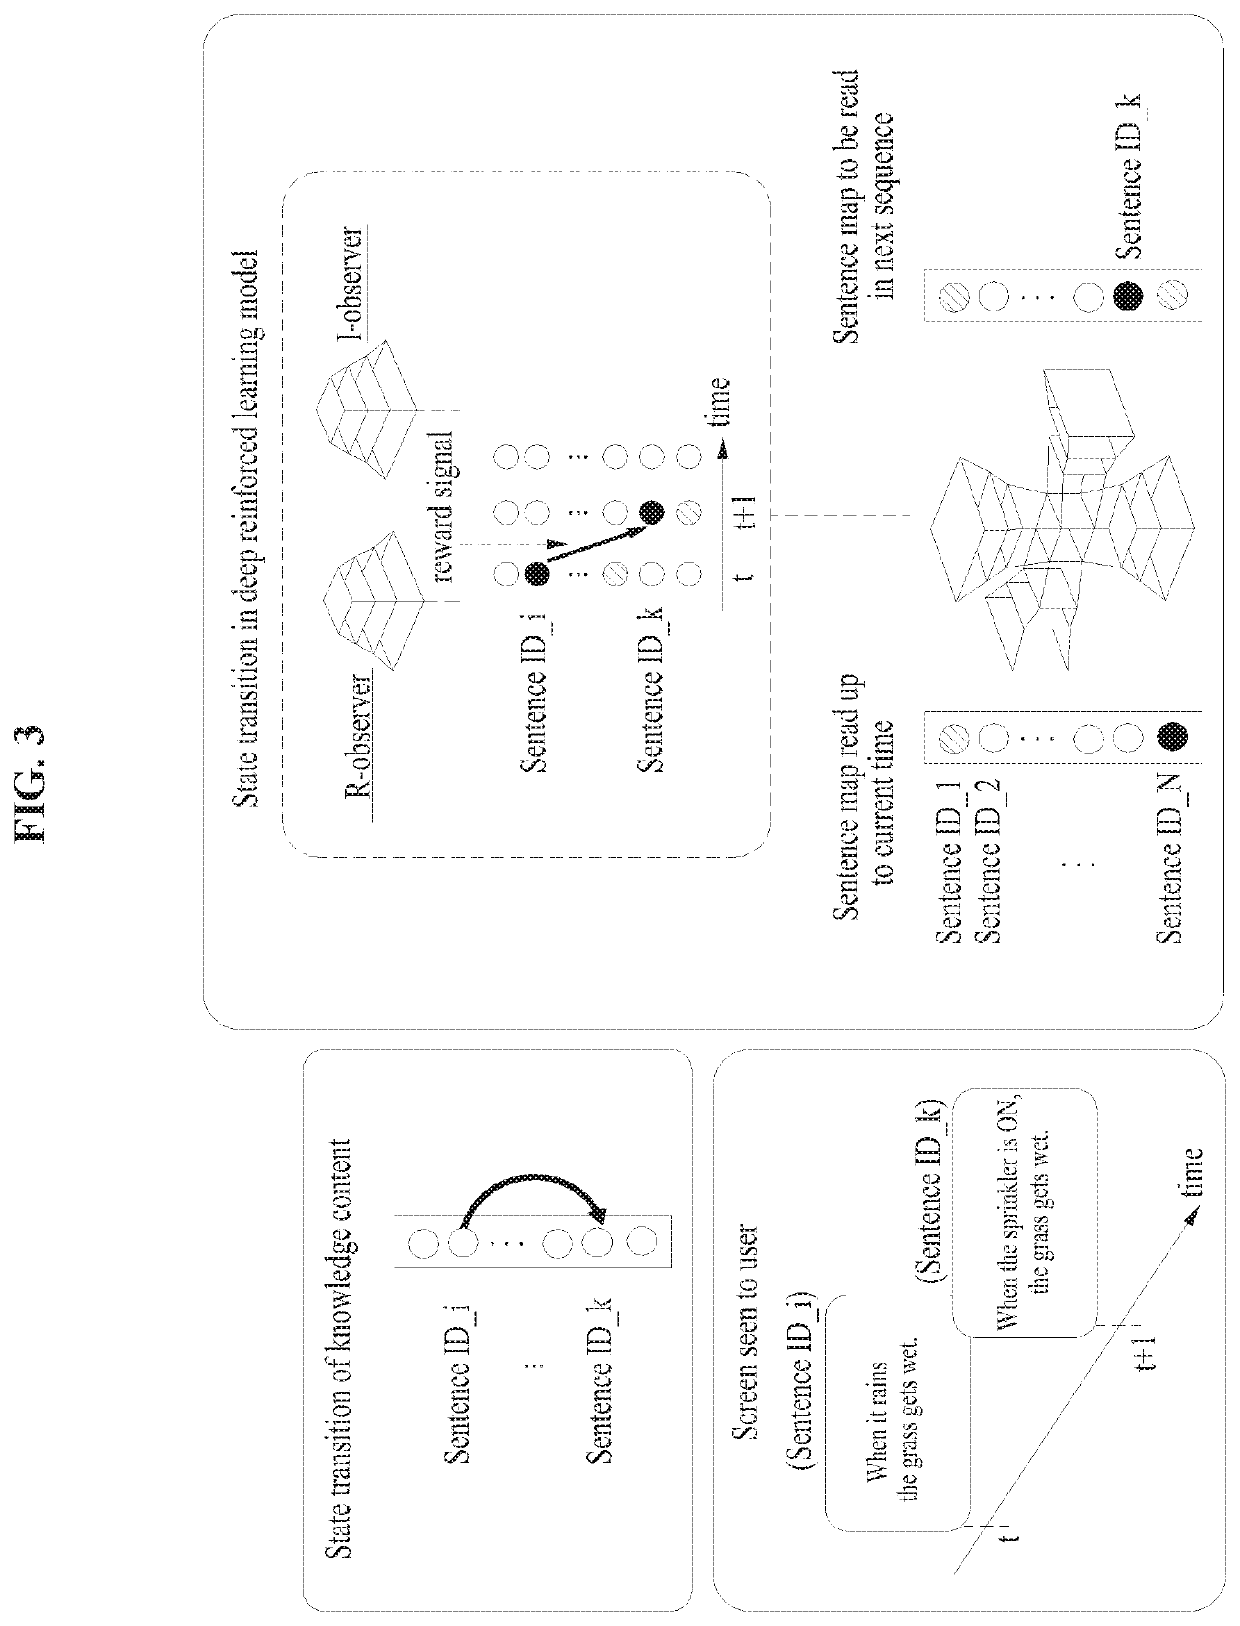 Non-invasive control apparatus and method for human learning and inference process at behavioral and neural levels based on brain-inspired artificial intelligence technique